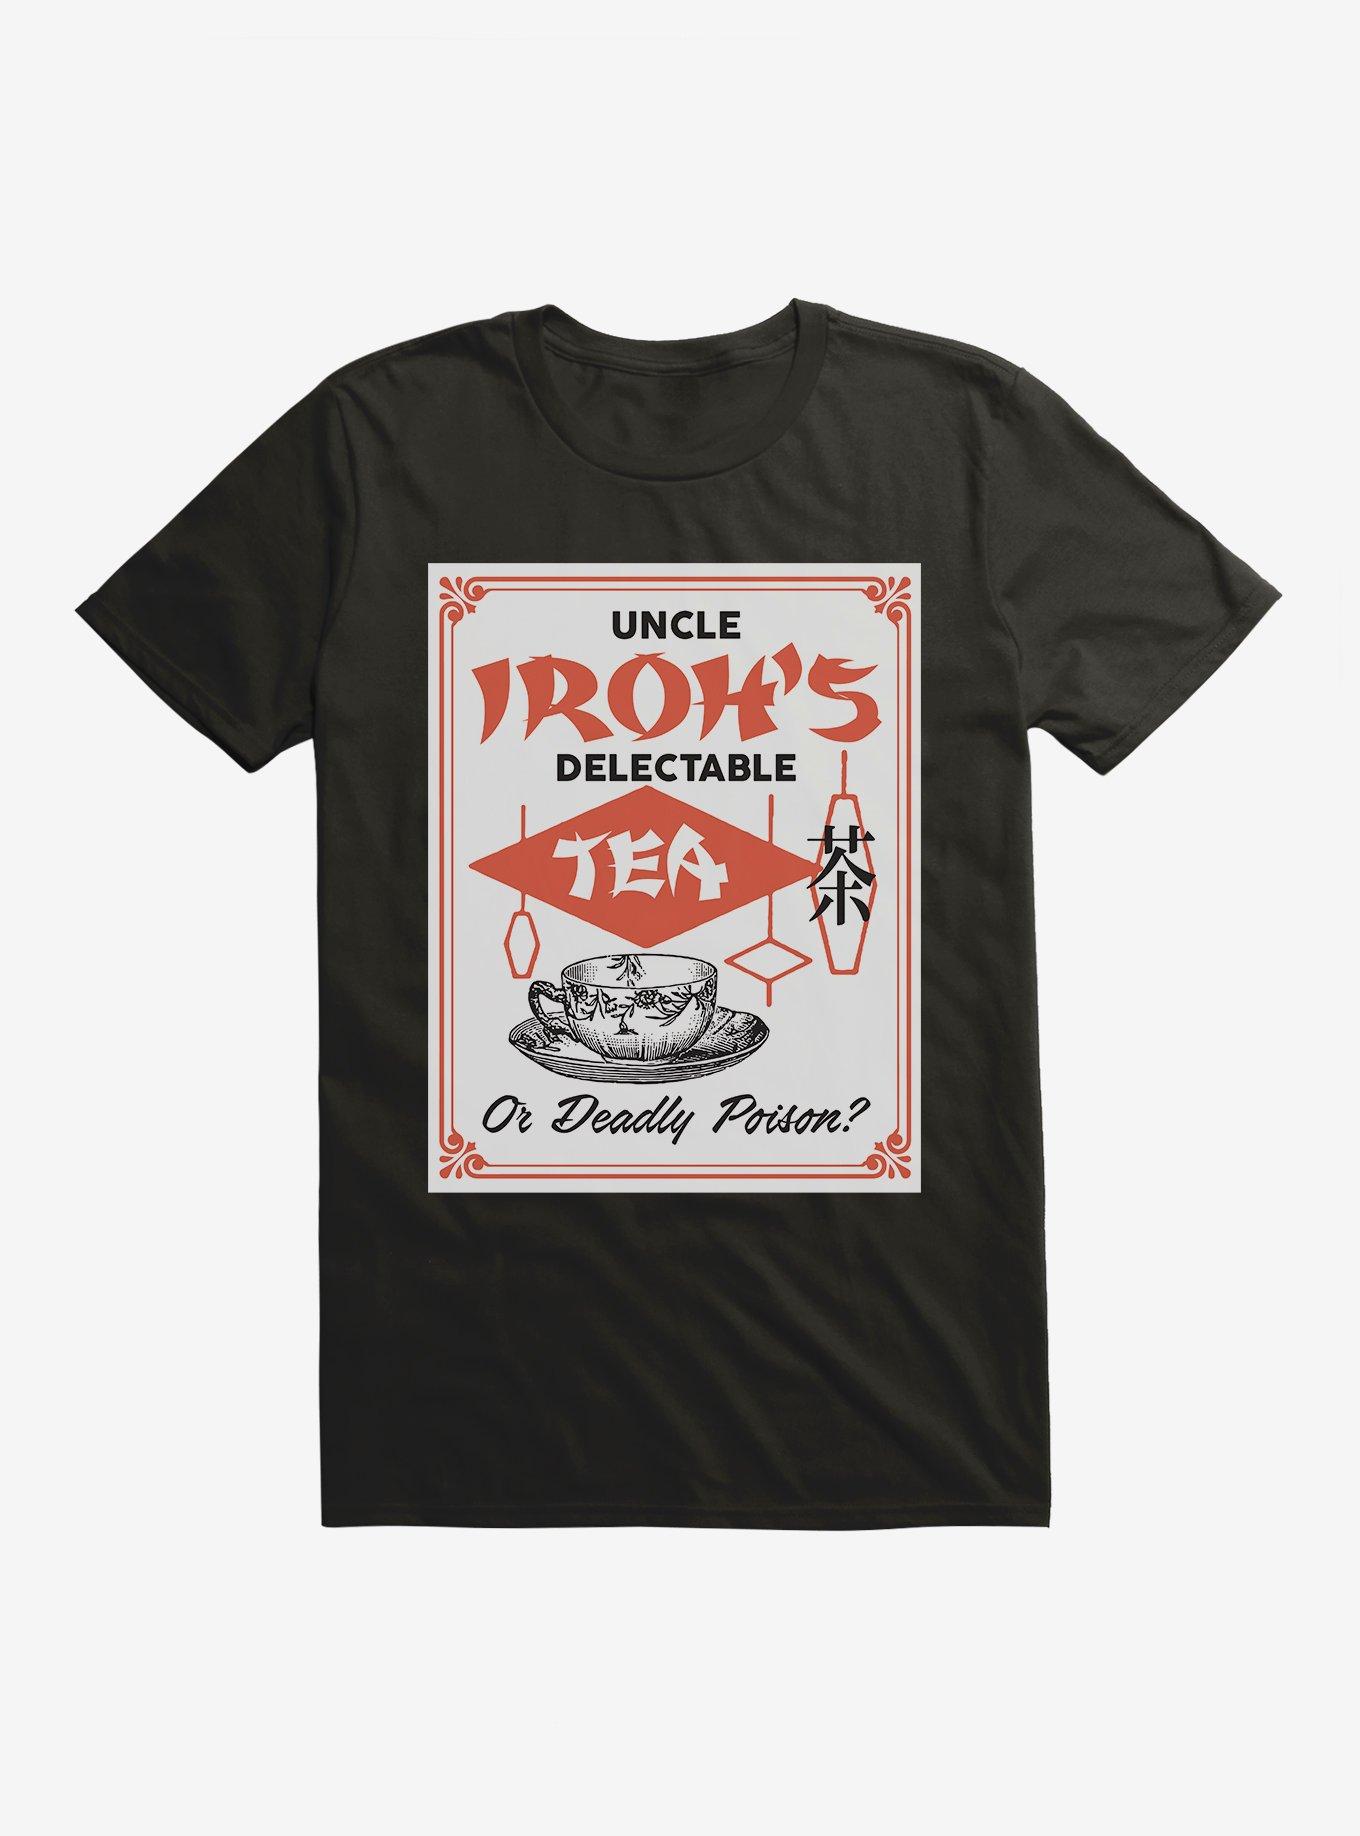 Avatar The Legend Of Aang Uncle Iroh Delectable Tea Or Deadly Poison Sweatshirt  Sweater American Animated TV Series Cartoon Last Airbender